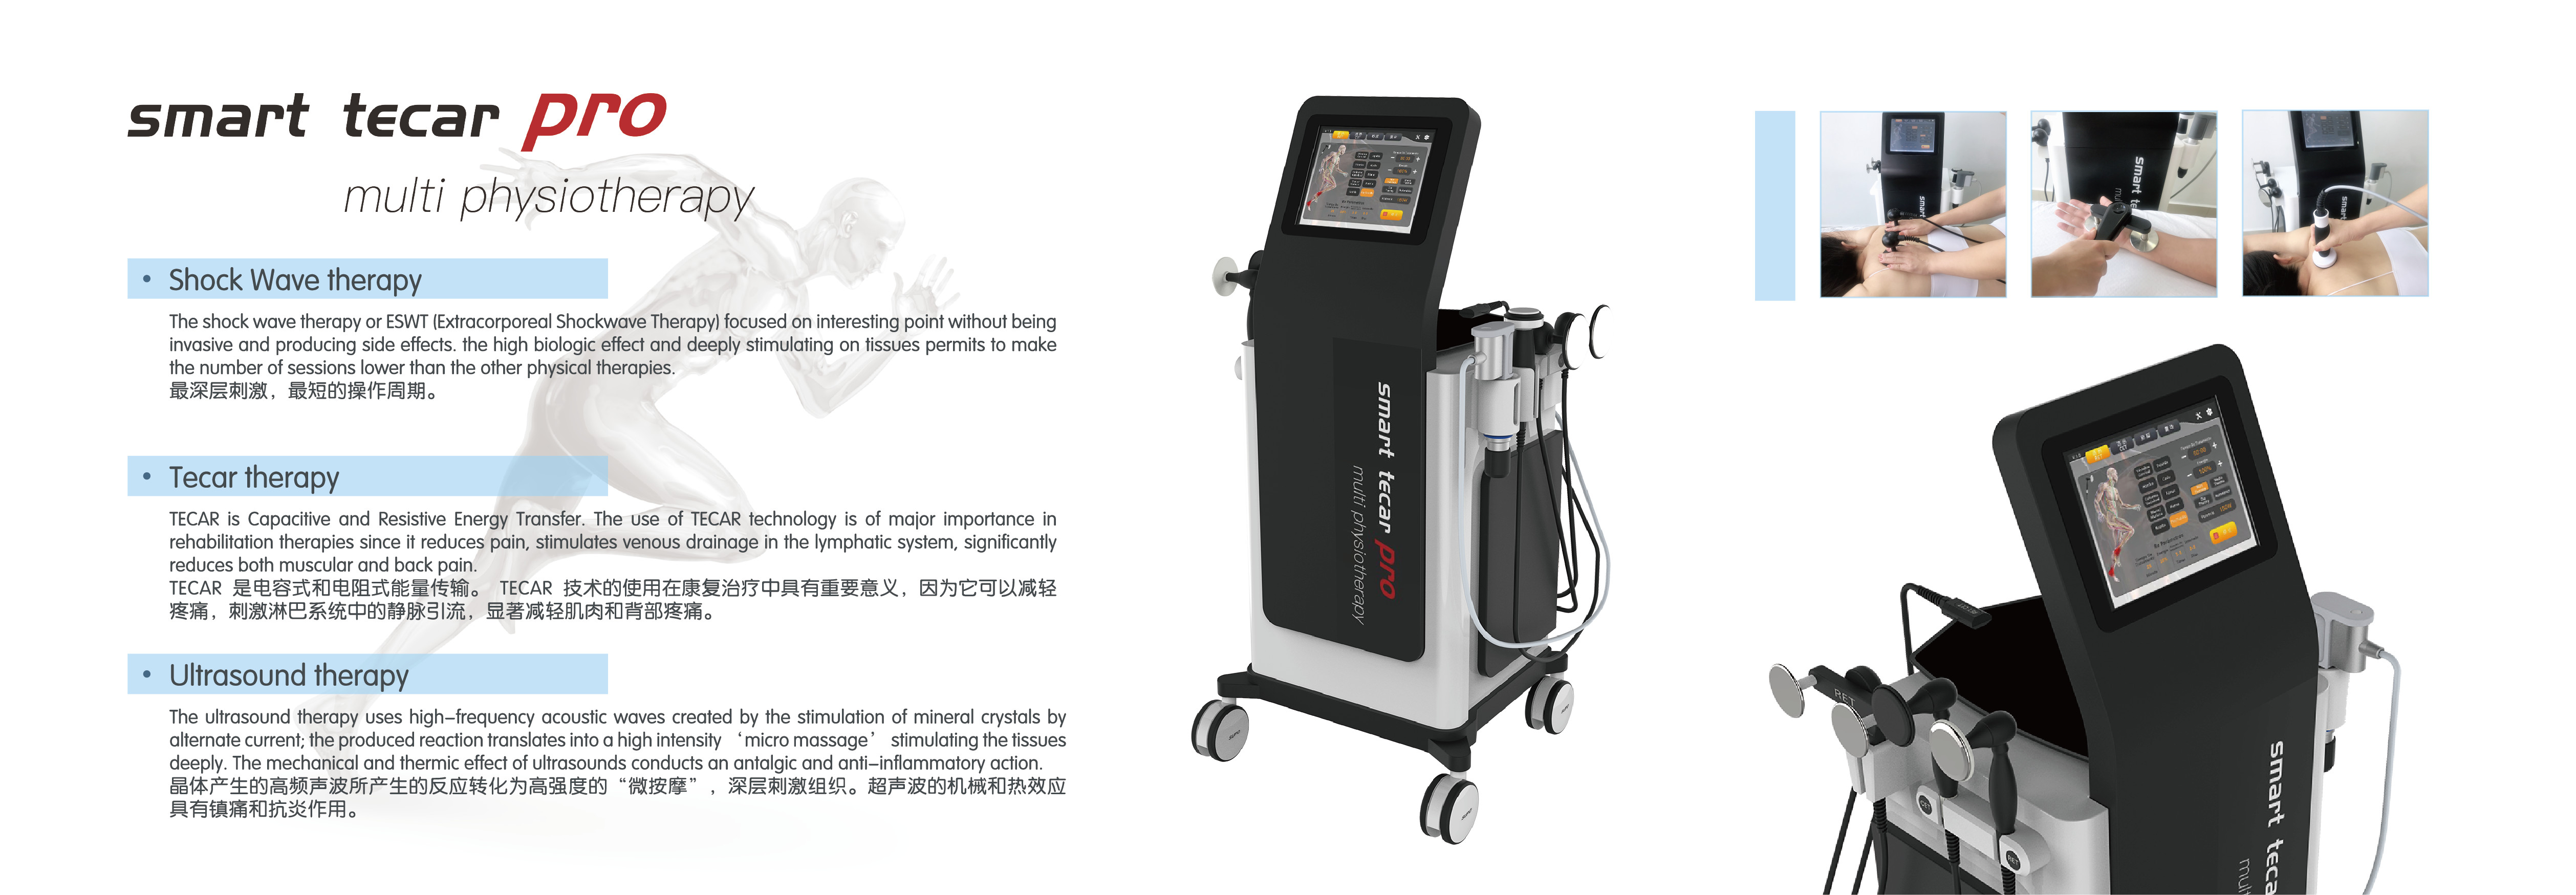 Tecar Therapy Microwave Diathermy Equipment For body Muscle Relax/Shockwave Therapy